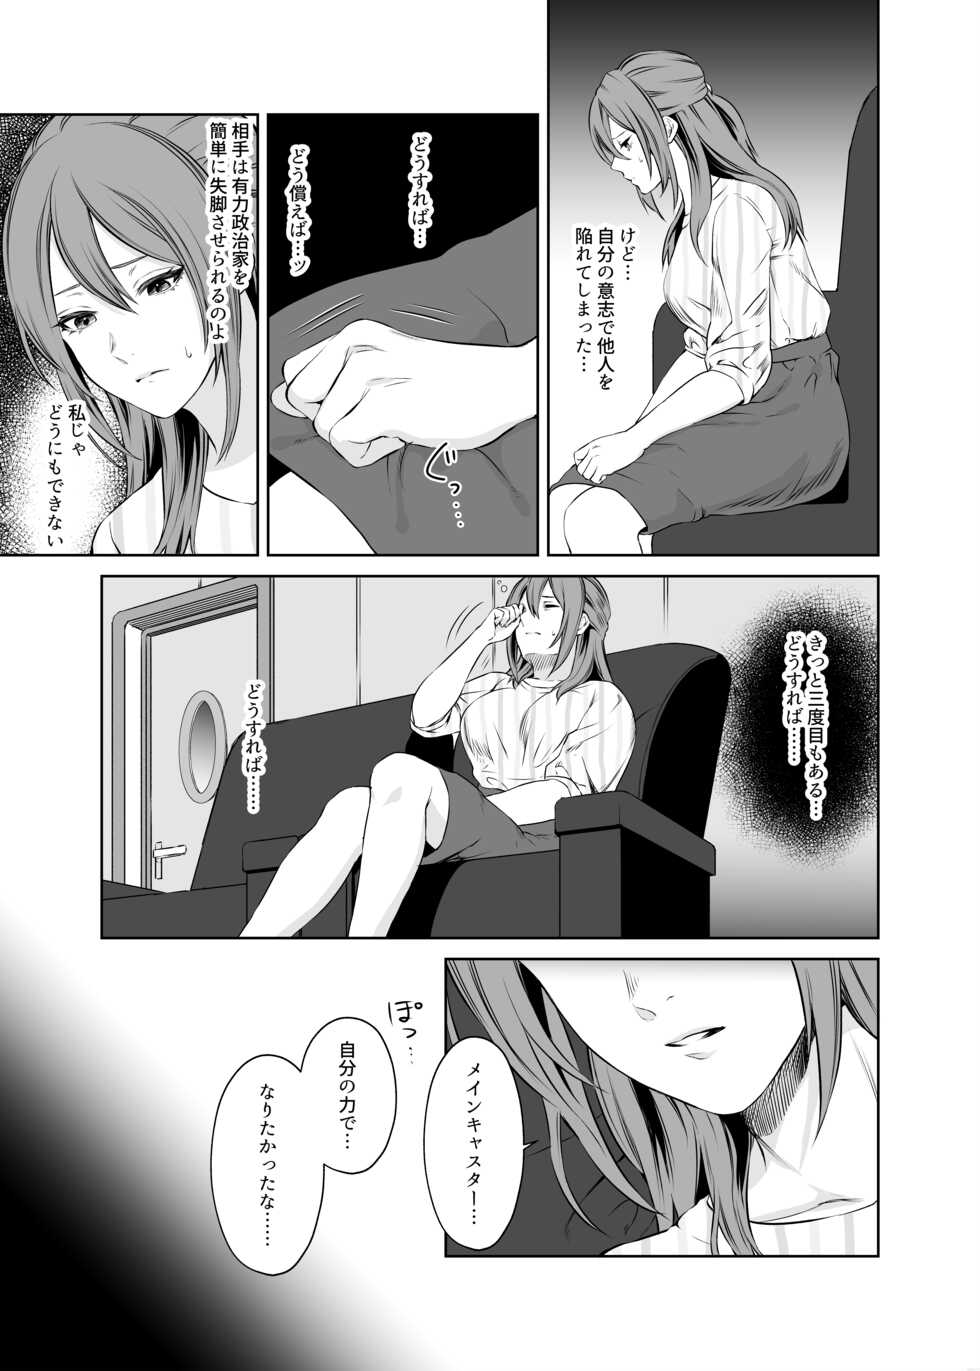 [Remora Works (Meriko)] LesFes Co -Candid Reporting- Vol. 003 - Page 6